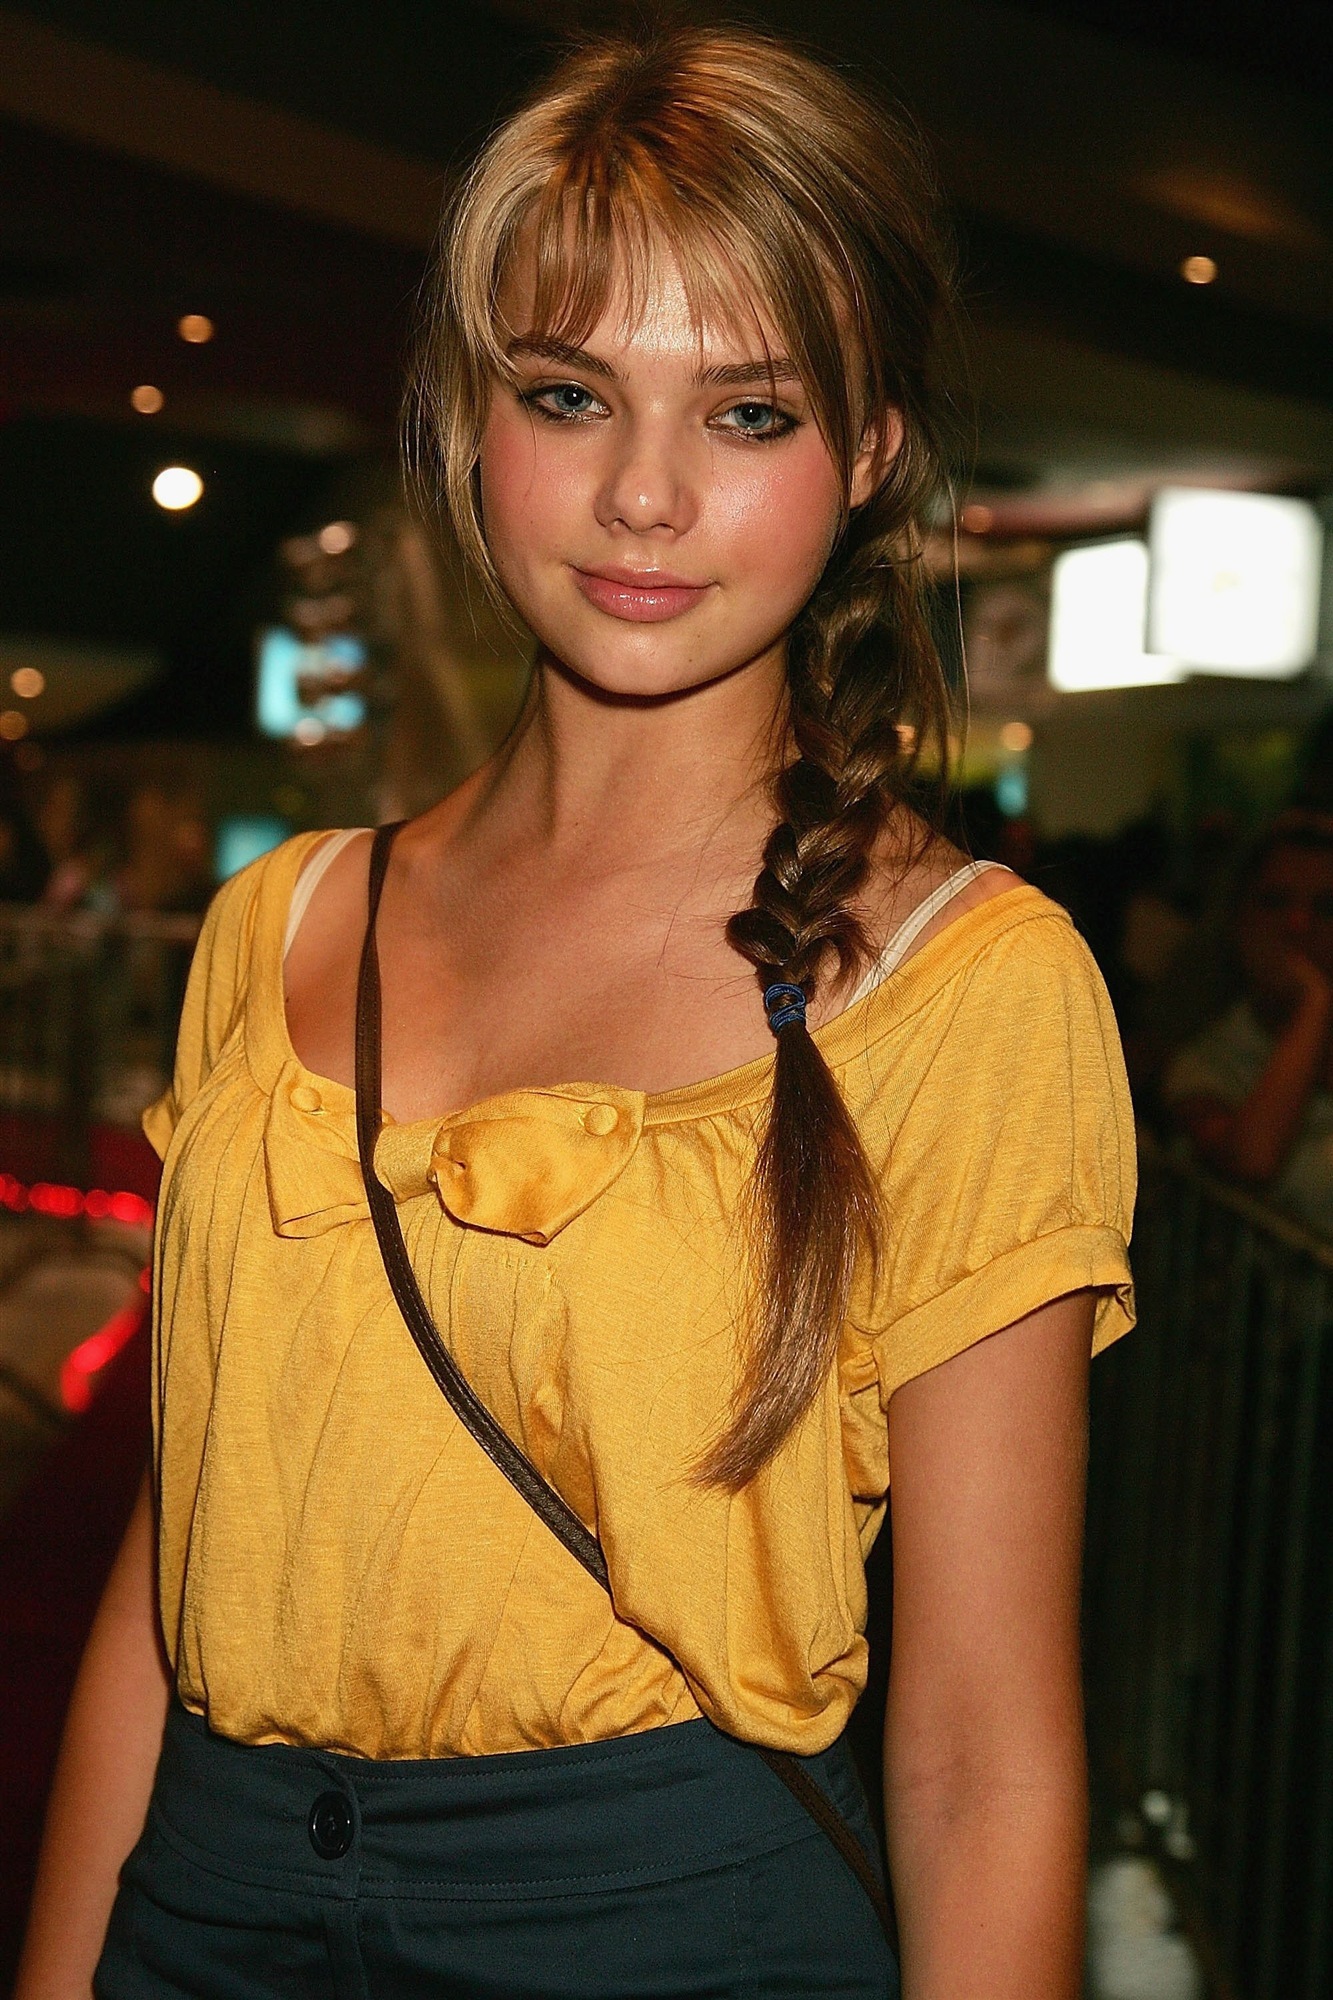 Indiana Evans leaked wallpapers